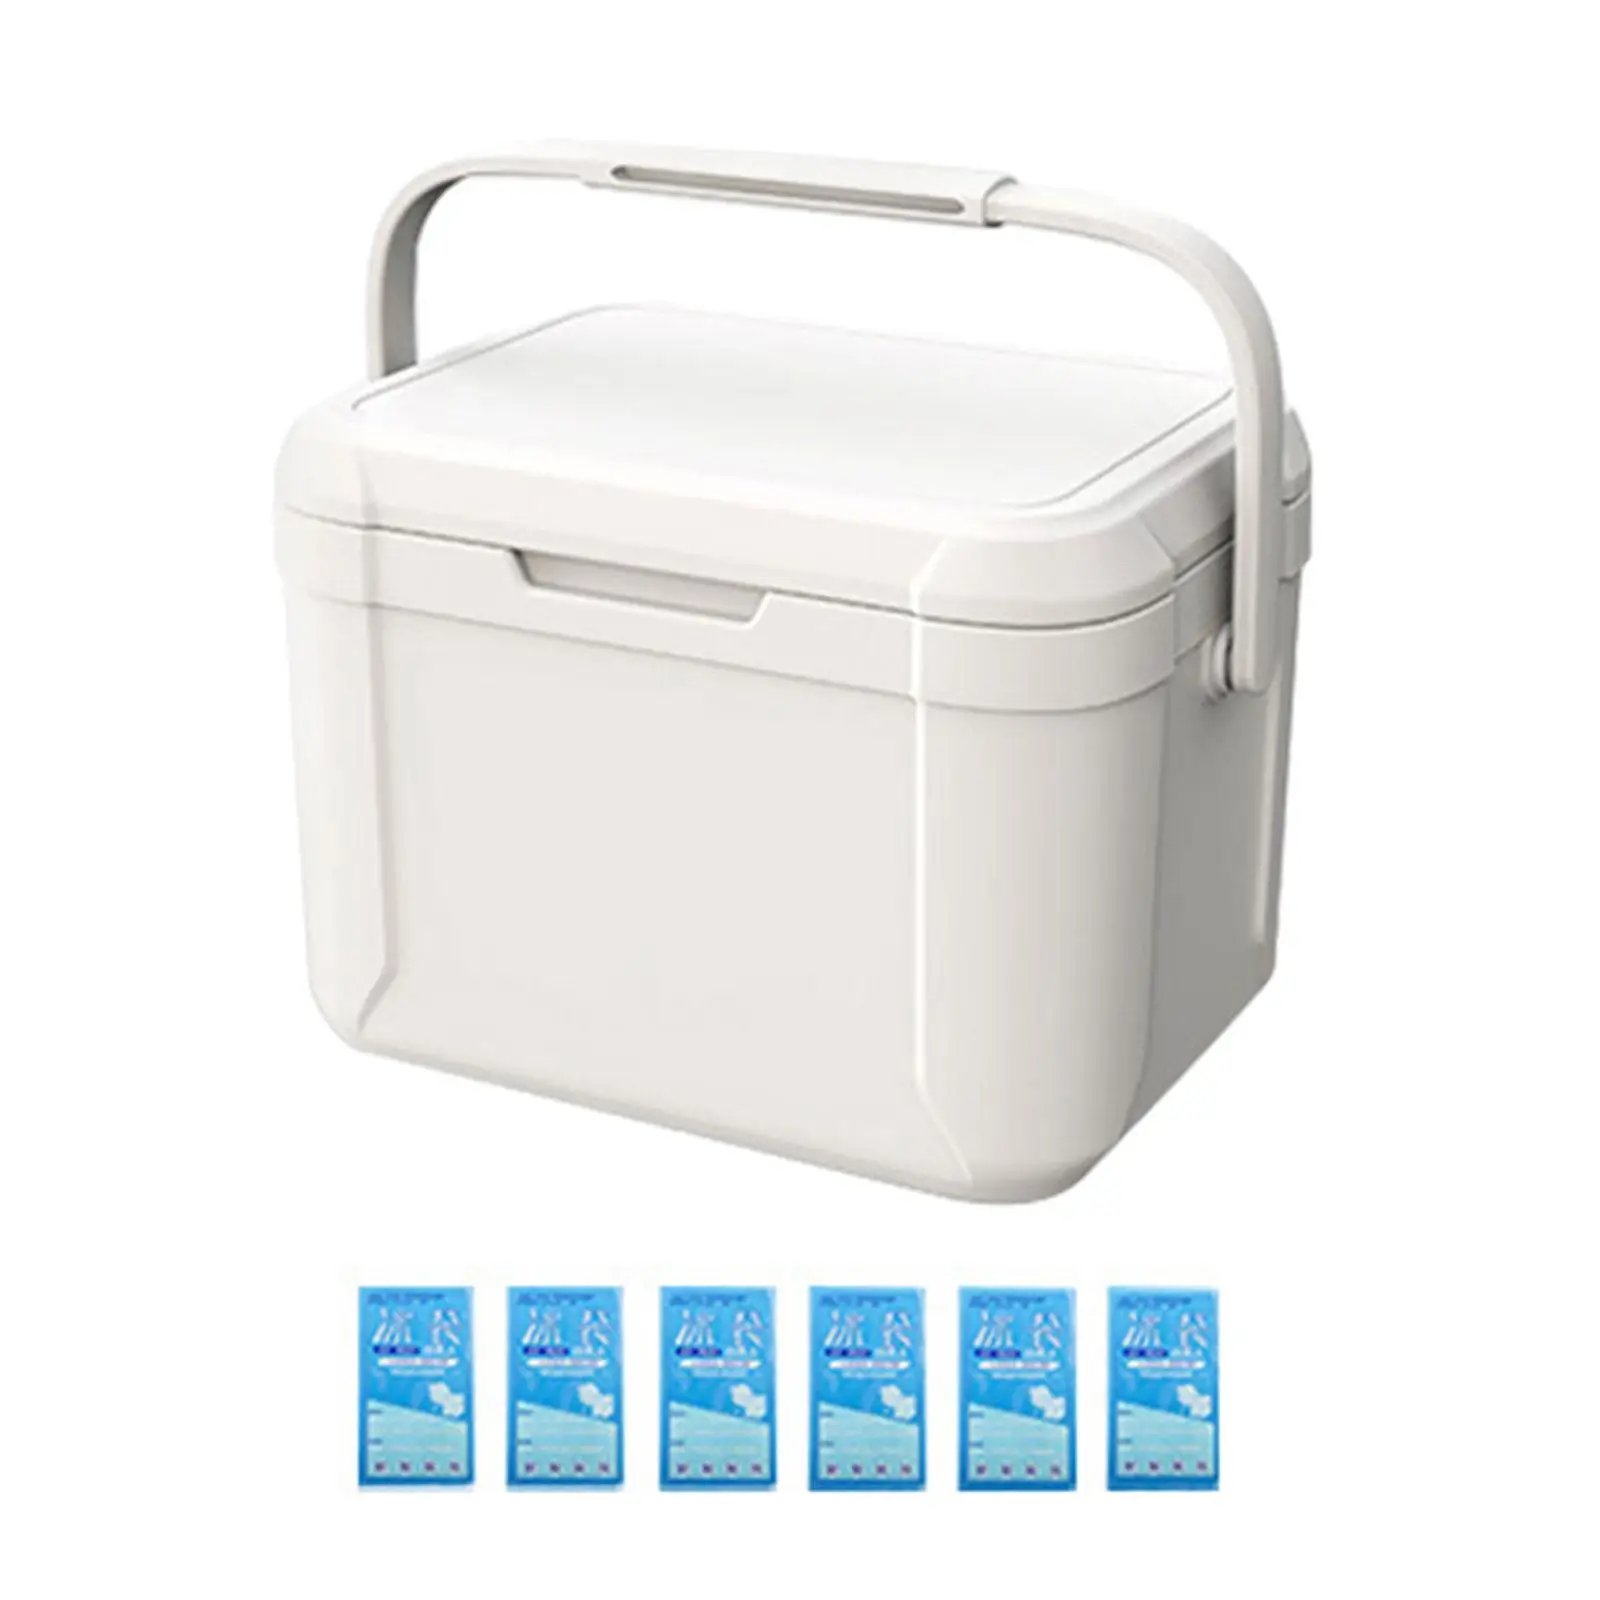 Cooler Box Household 5L Hot/Cold Retention Cooler for Picnic Barbecue Indoor